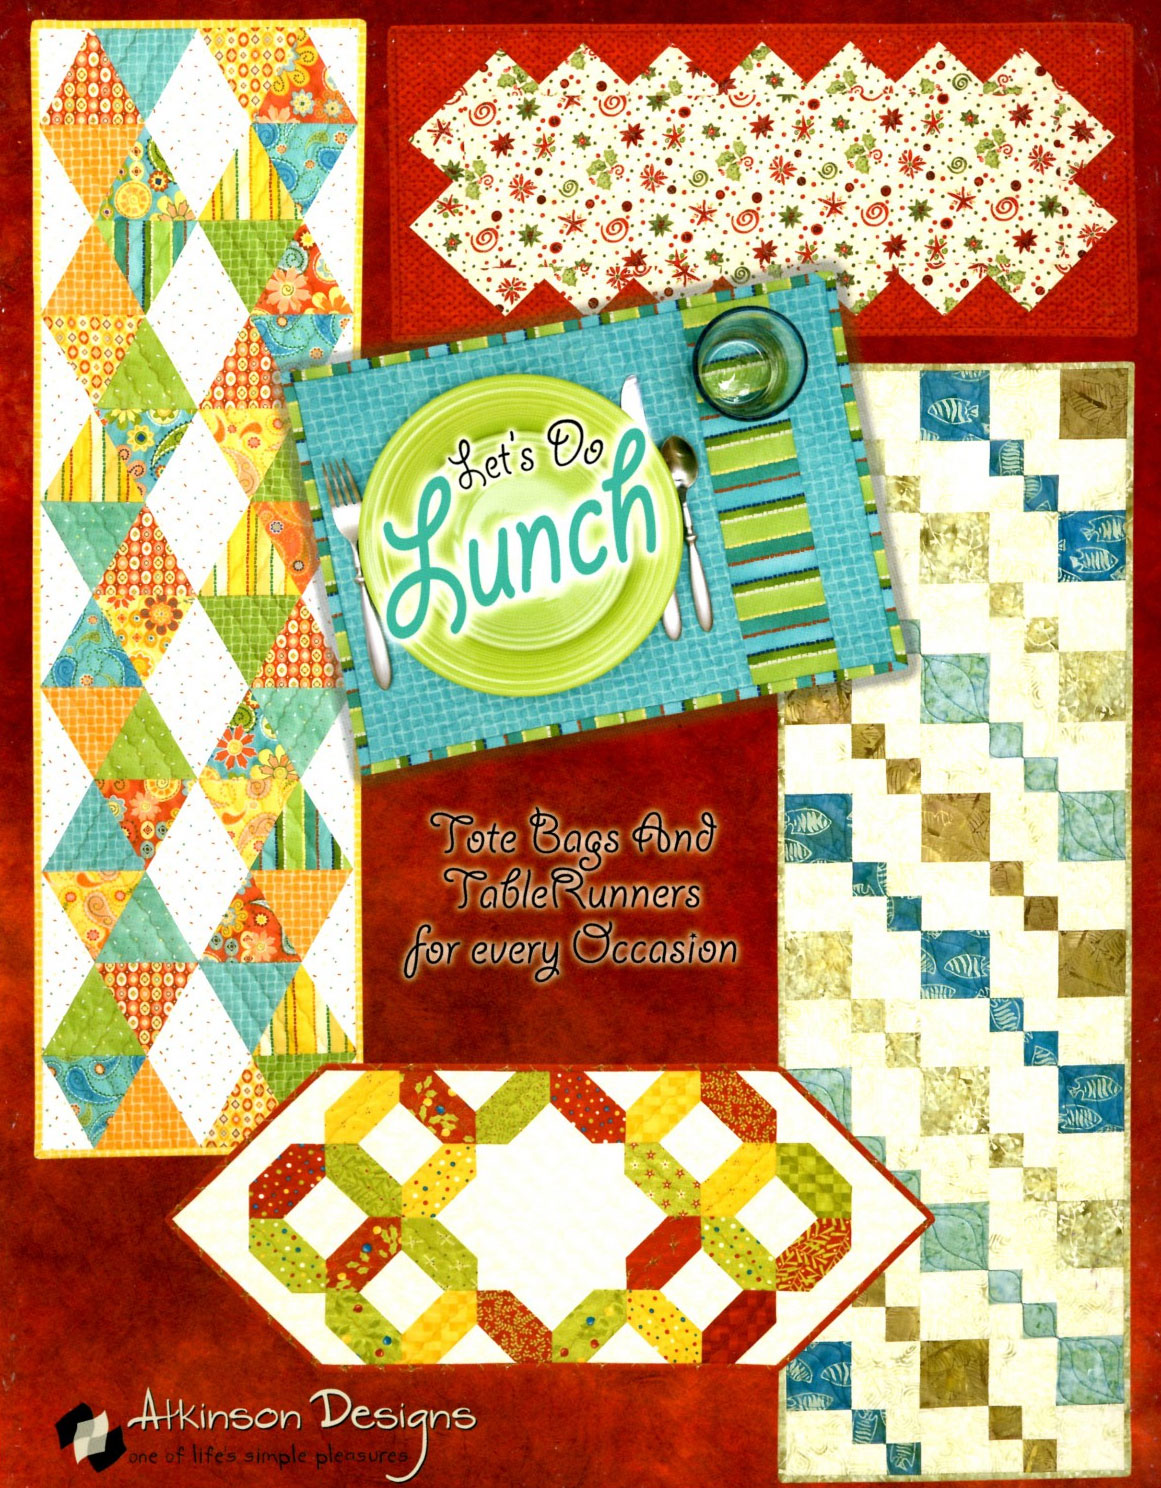 Lets-Do-Lunch-sewing-pattern-Atkinson-Designs-front